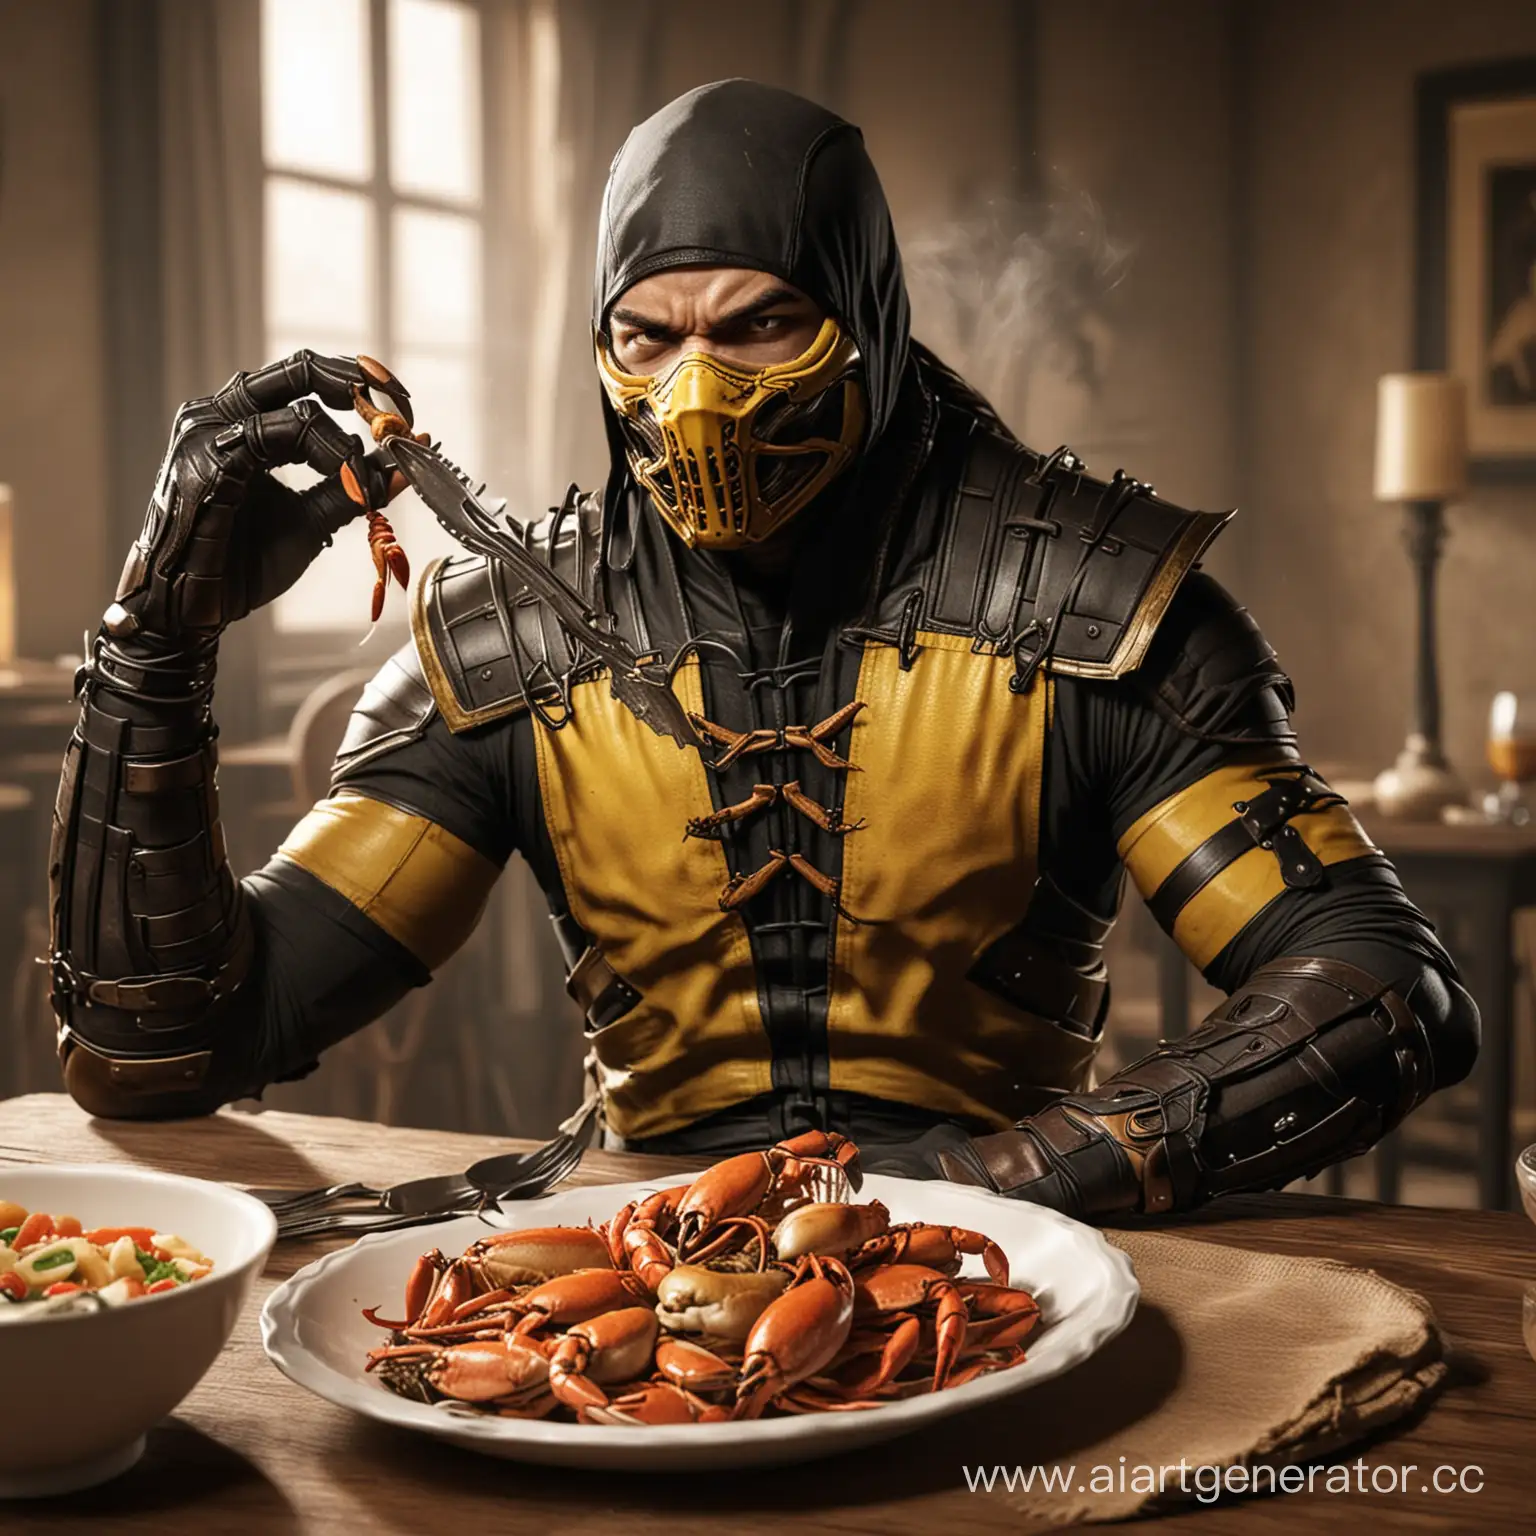 Scorpion-from-Mortal-Kombat-Dining-on-Crab-Dish-with-Utensils